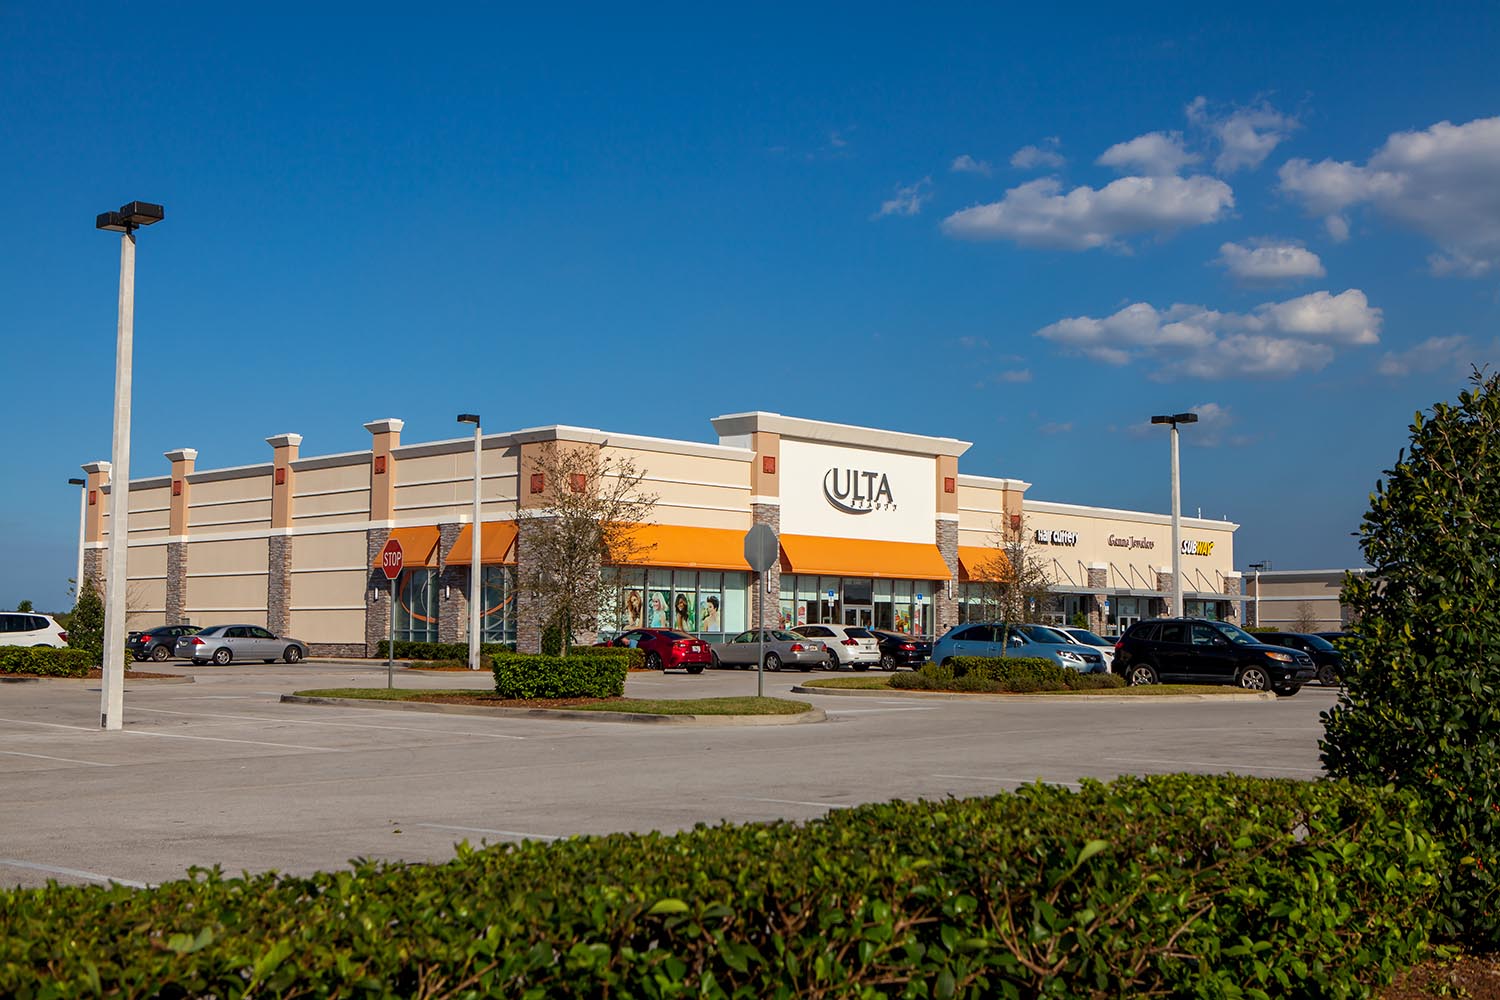 Ultra Beauty located in Viera